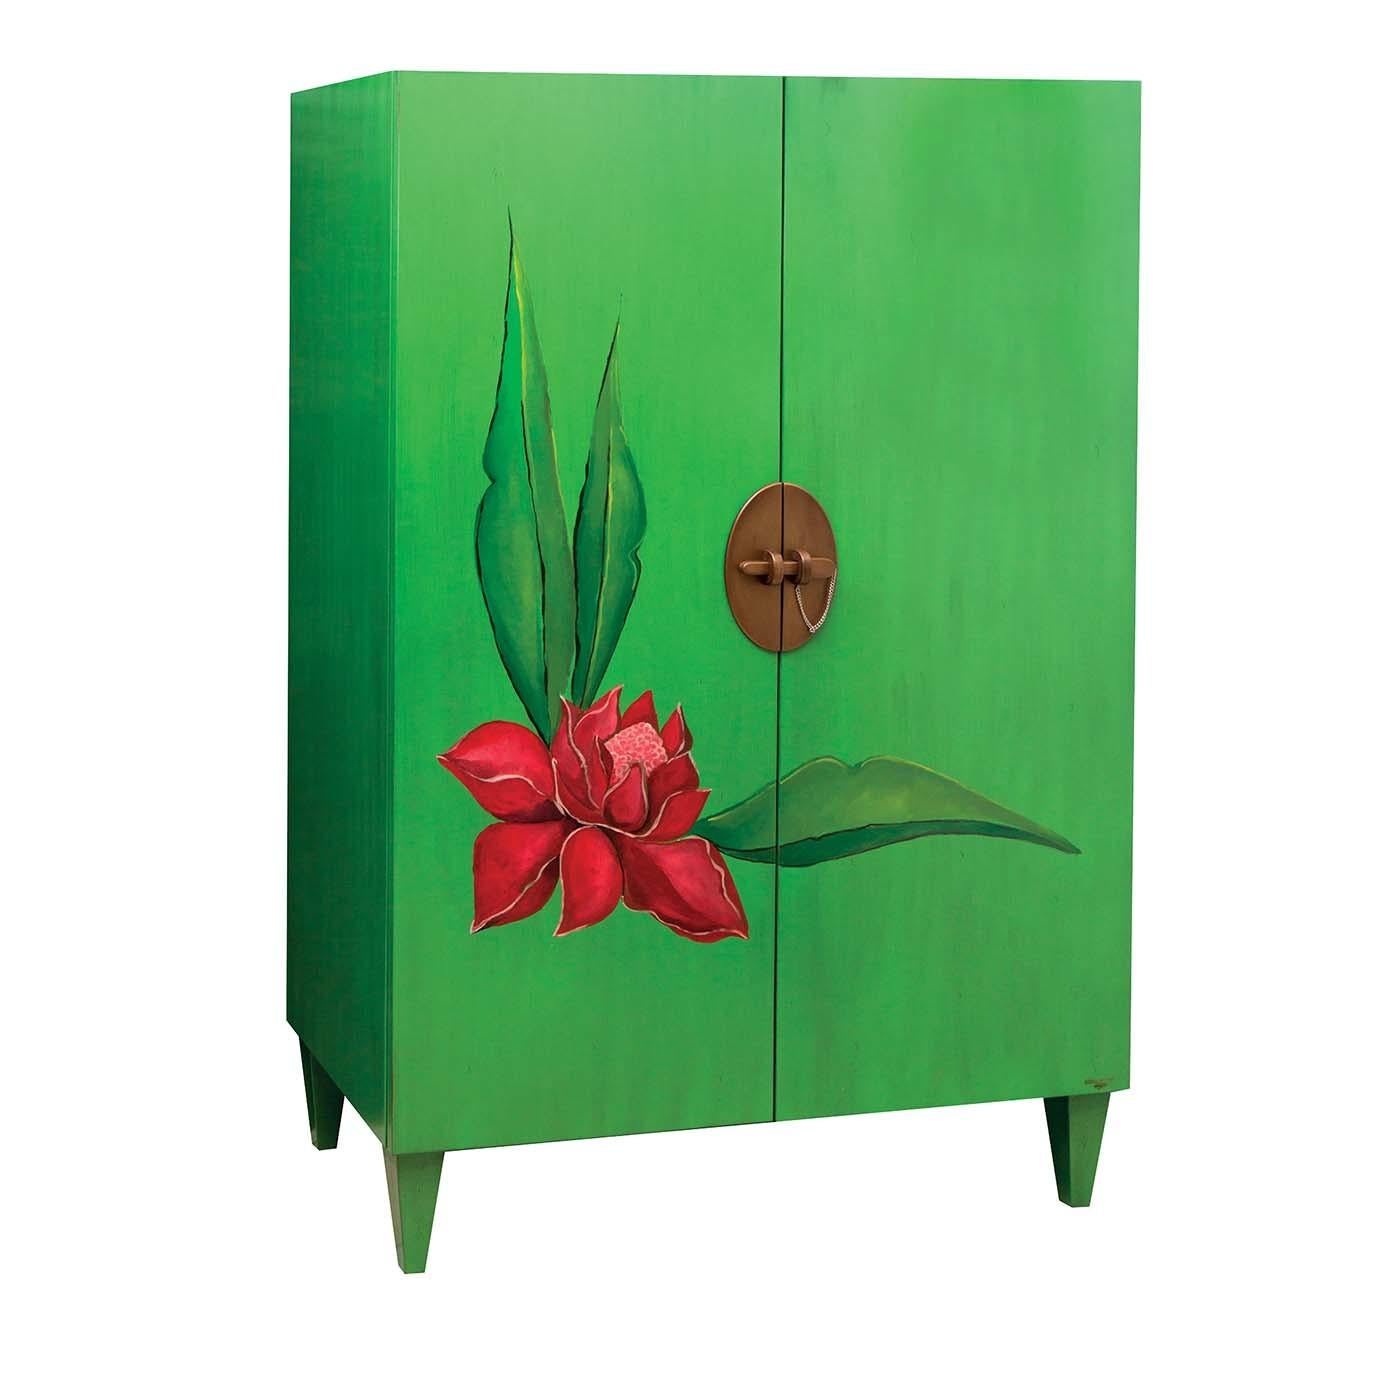 Exquisitely crafted of solid Toulipier walnut wood with Tanganica wood veneer, this cabinet will enliven the decor of a child's bedroom or an eclectic interior. Boasting a green lacquered finish enriched with an antique effect, it is adorned with a